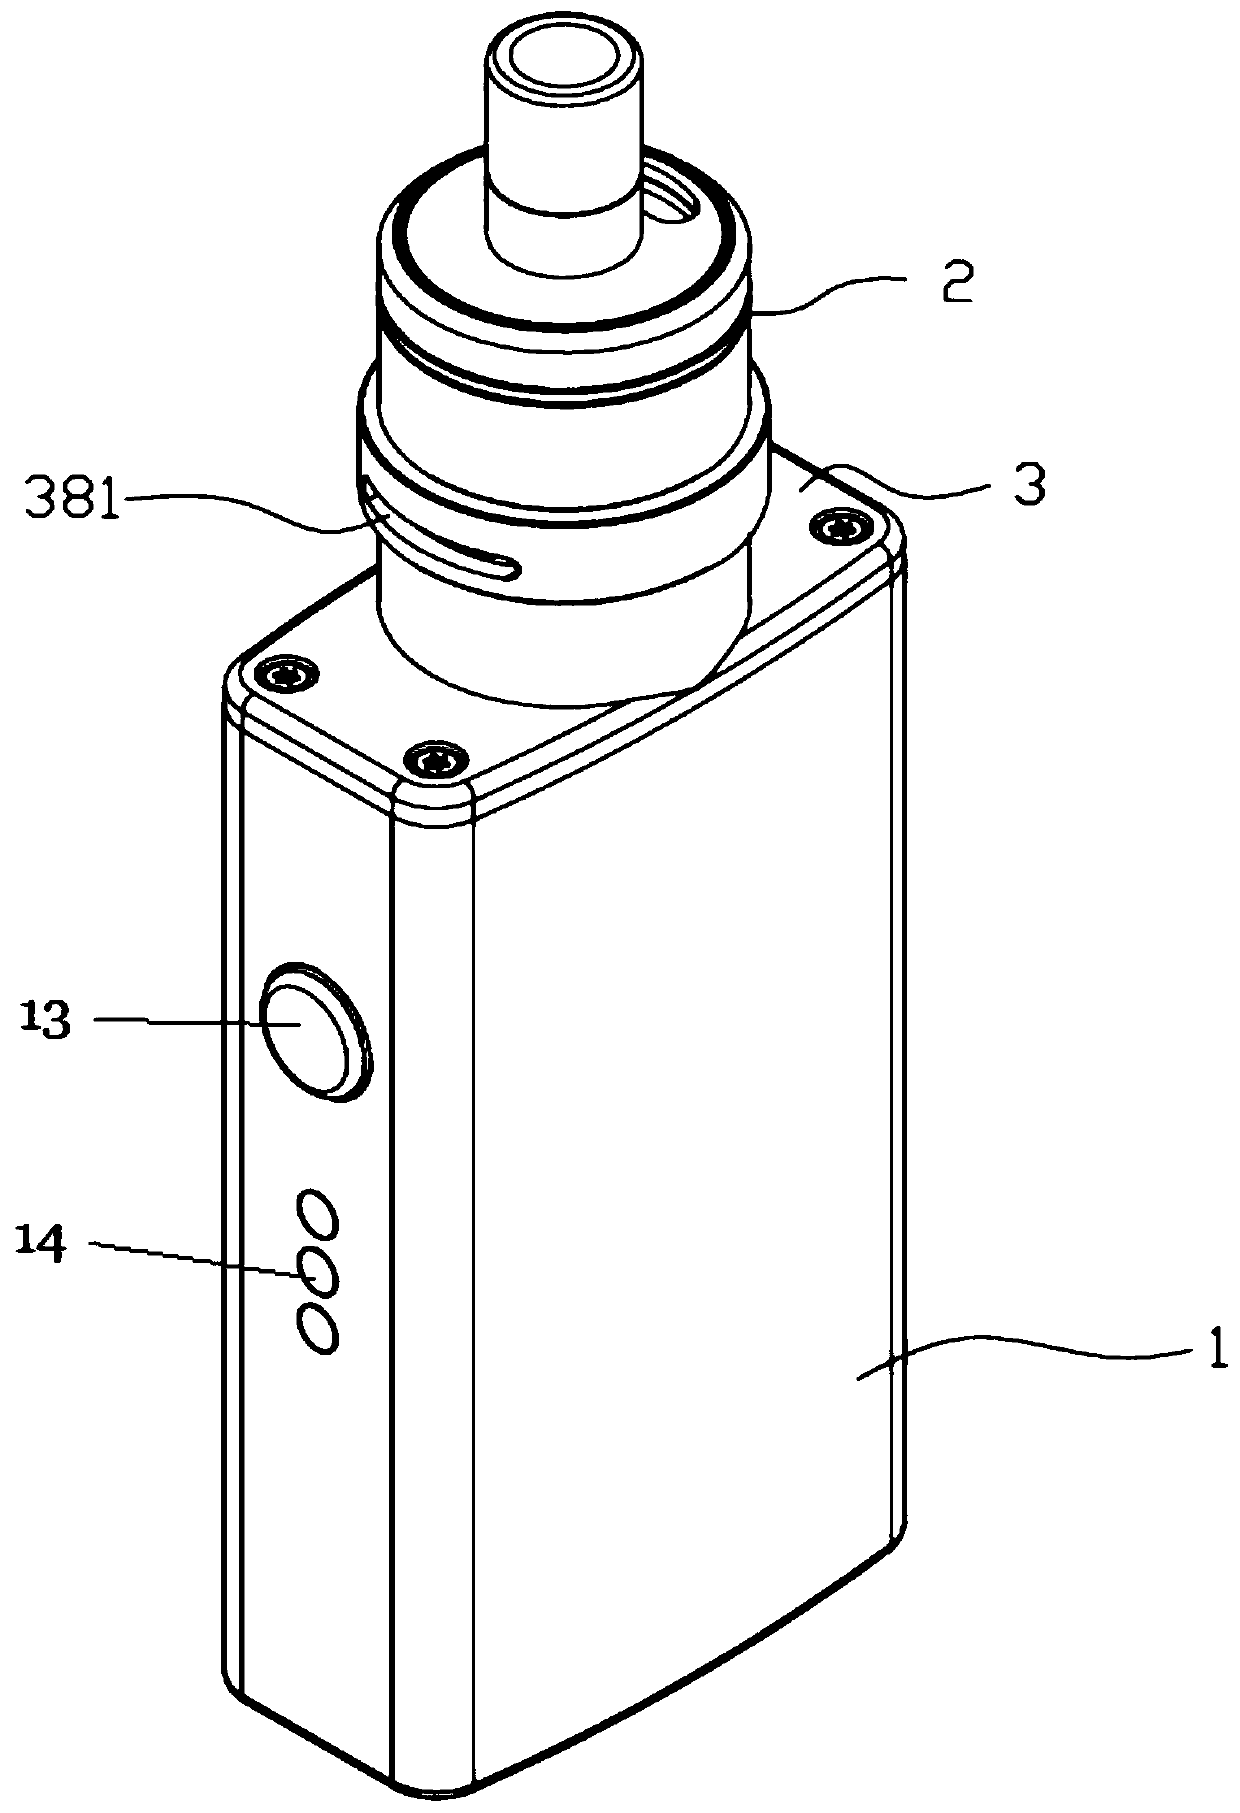 Electronic cigarette with induction coil and atomizer isolated from each other